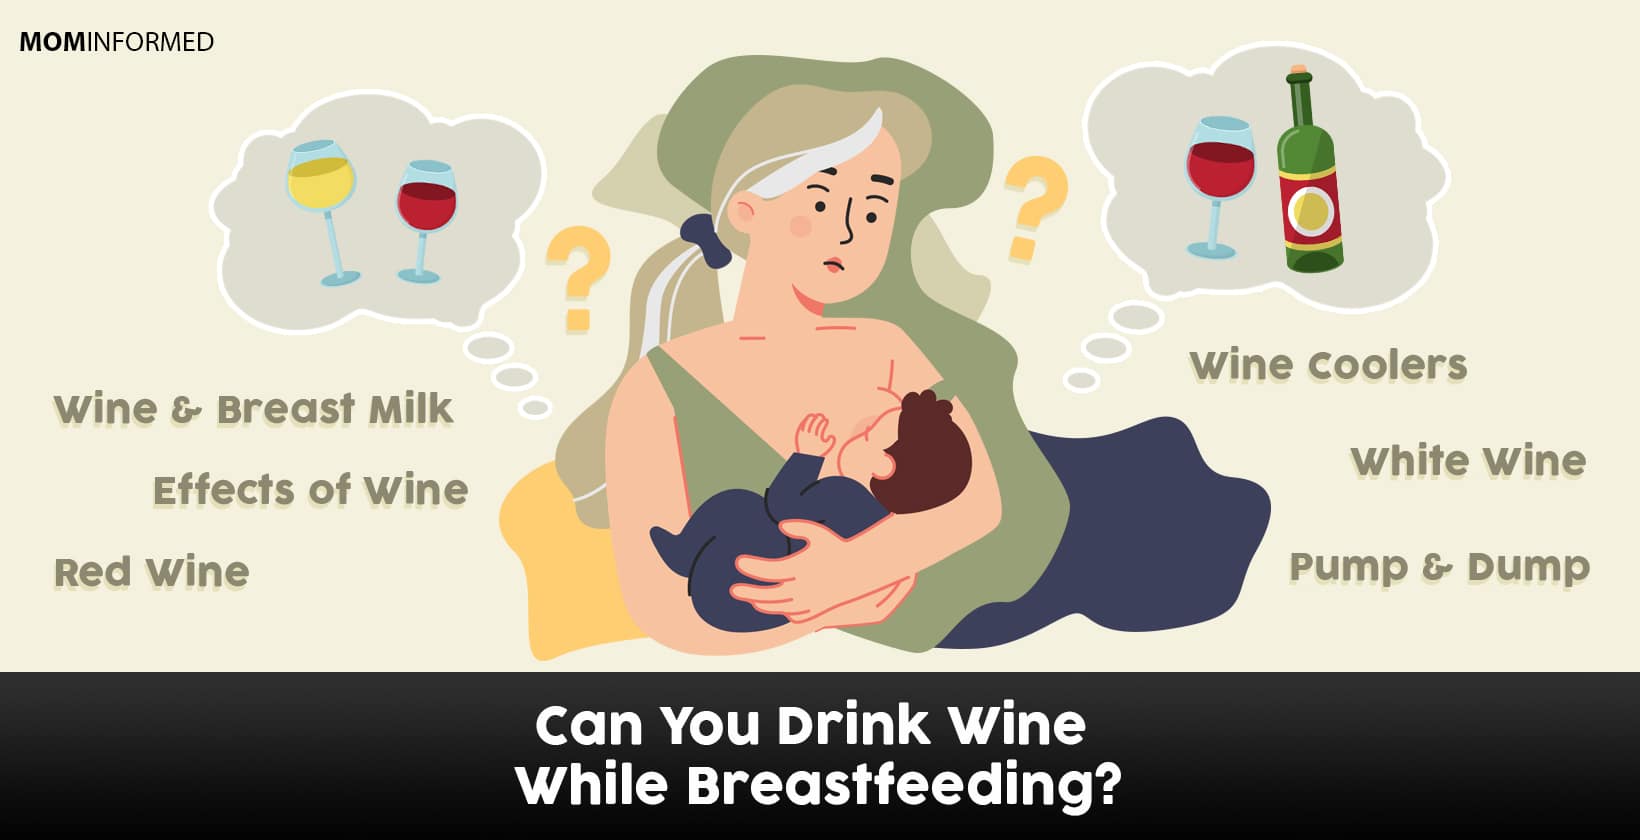 Can I drink wine while breastfeeding?